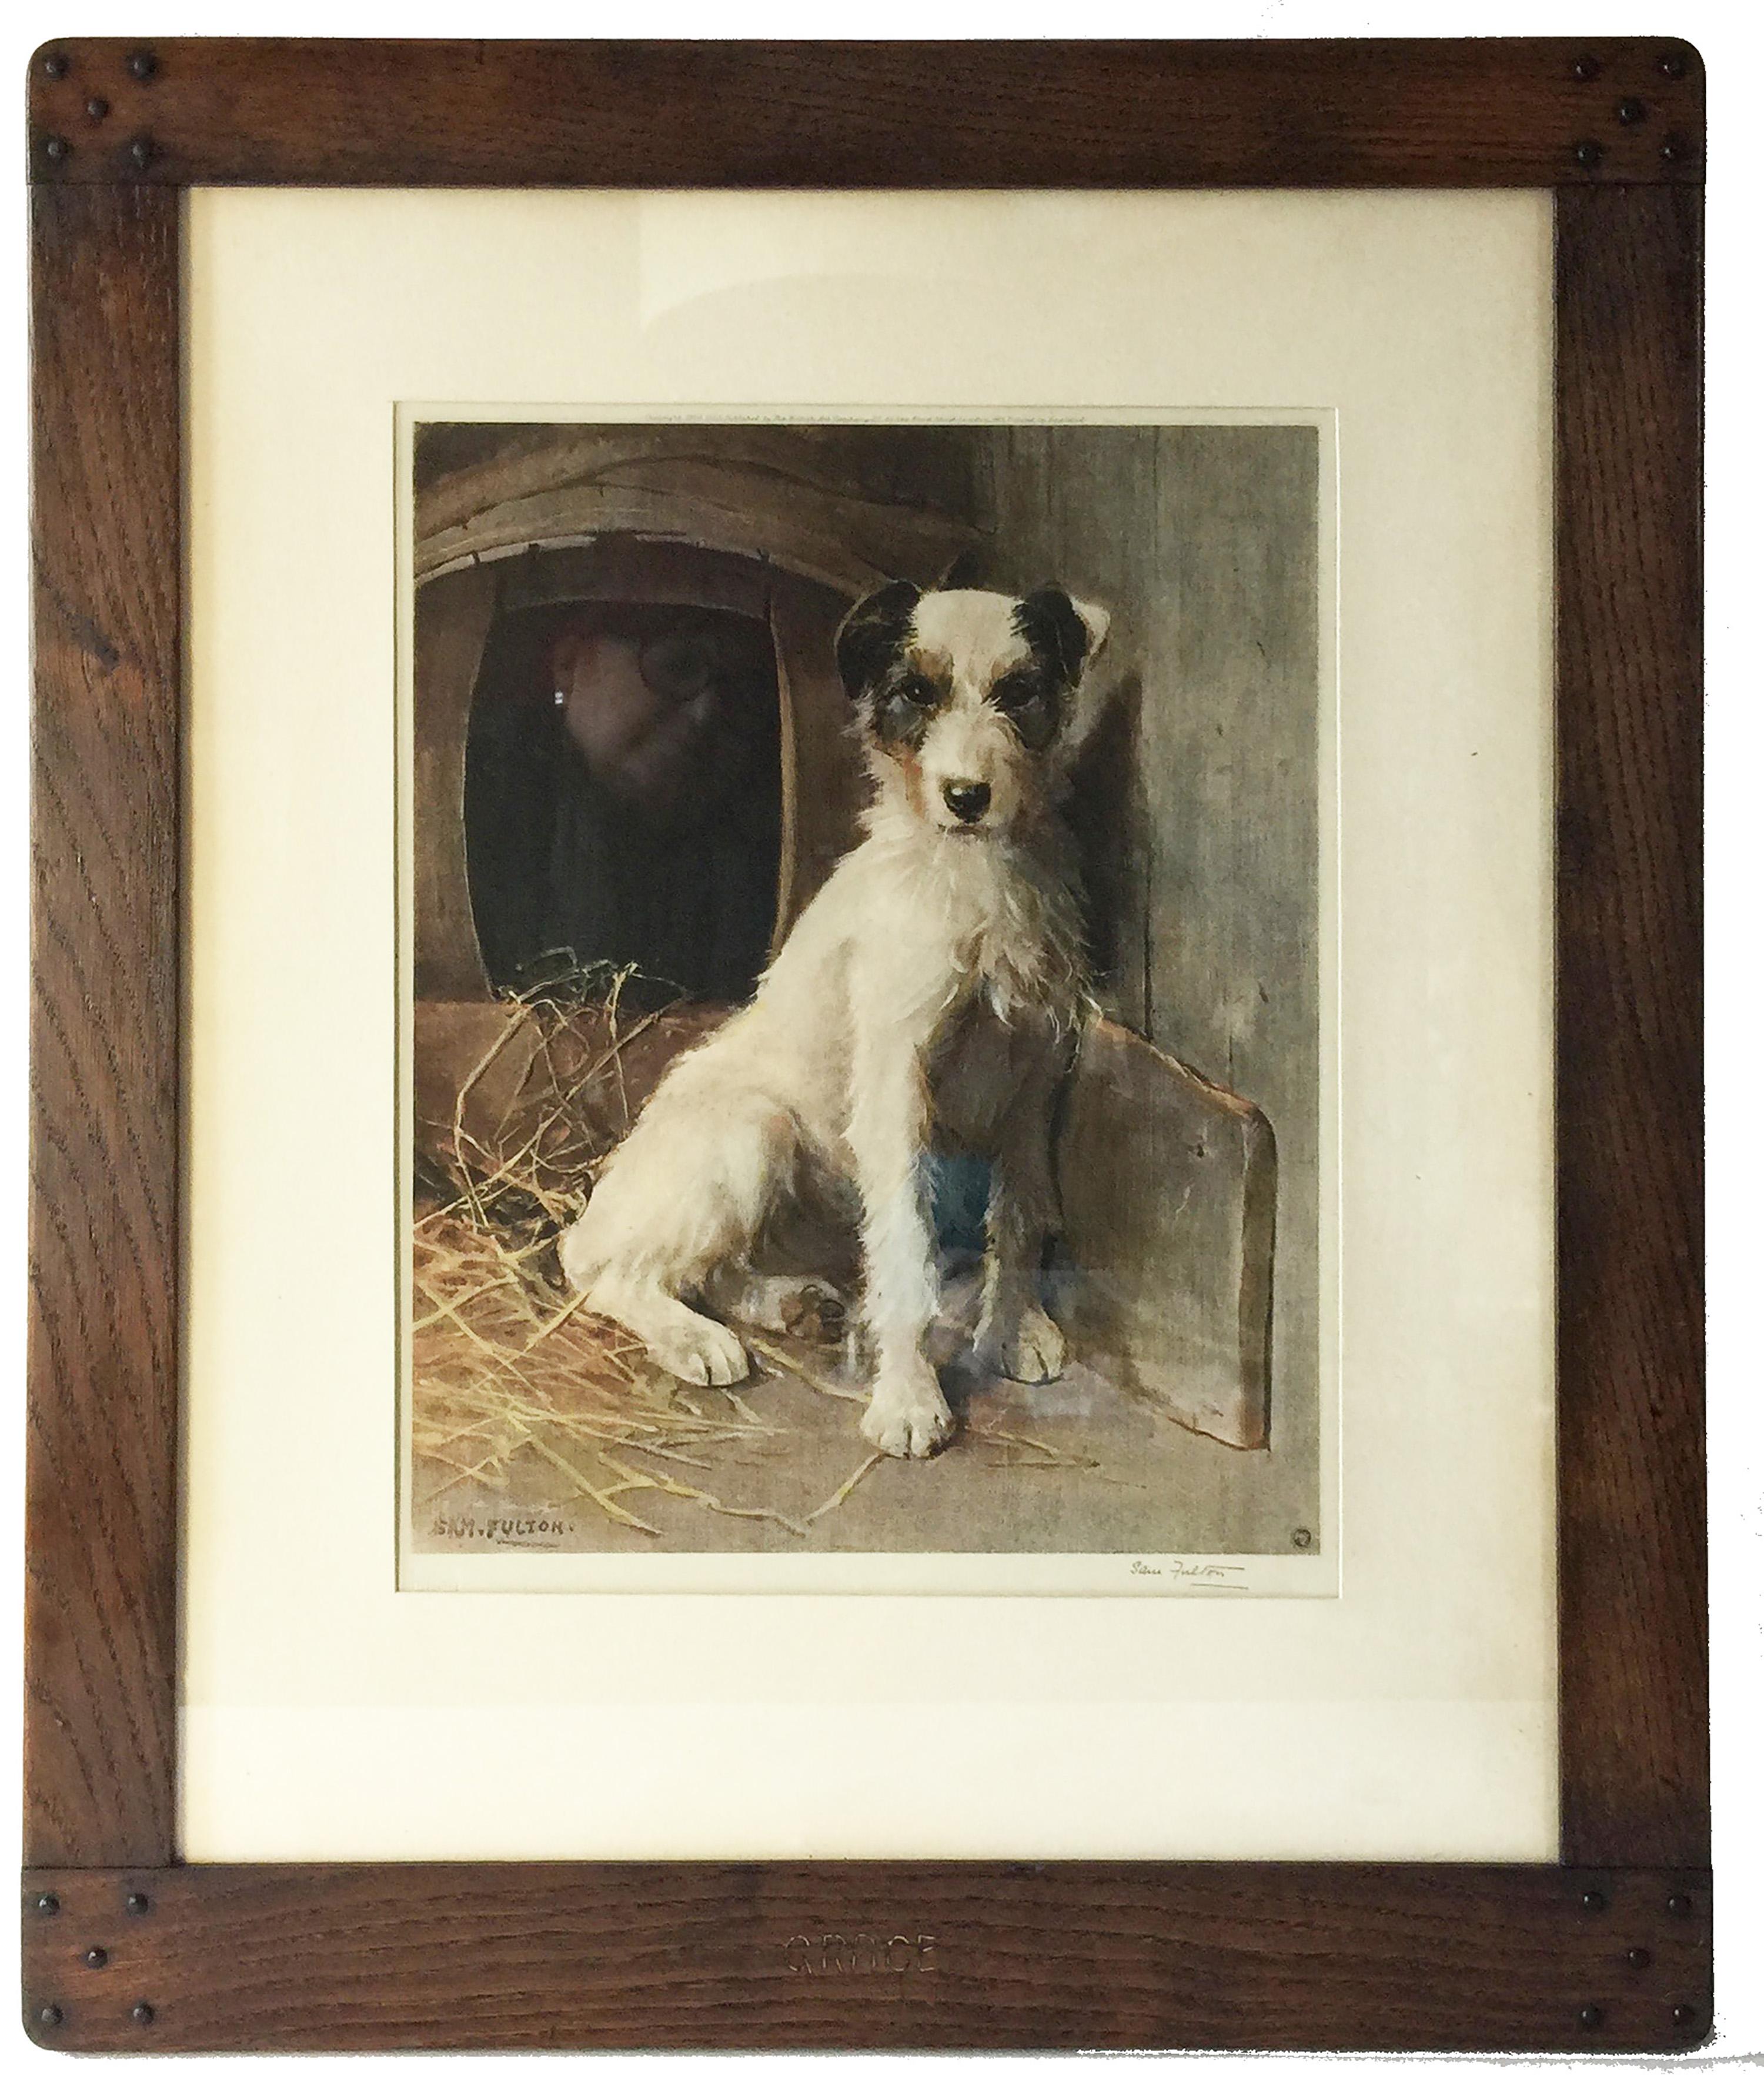 Pair of framed signed dog portraits of Grace and Disgrace by Sam Fulton printed by the British Art Company - England. The frames are Arts and Crafts in style with one metal dowel missing. Impint - Copyright 1920 USA Published by The British Art